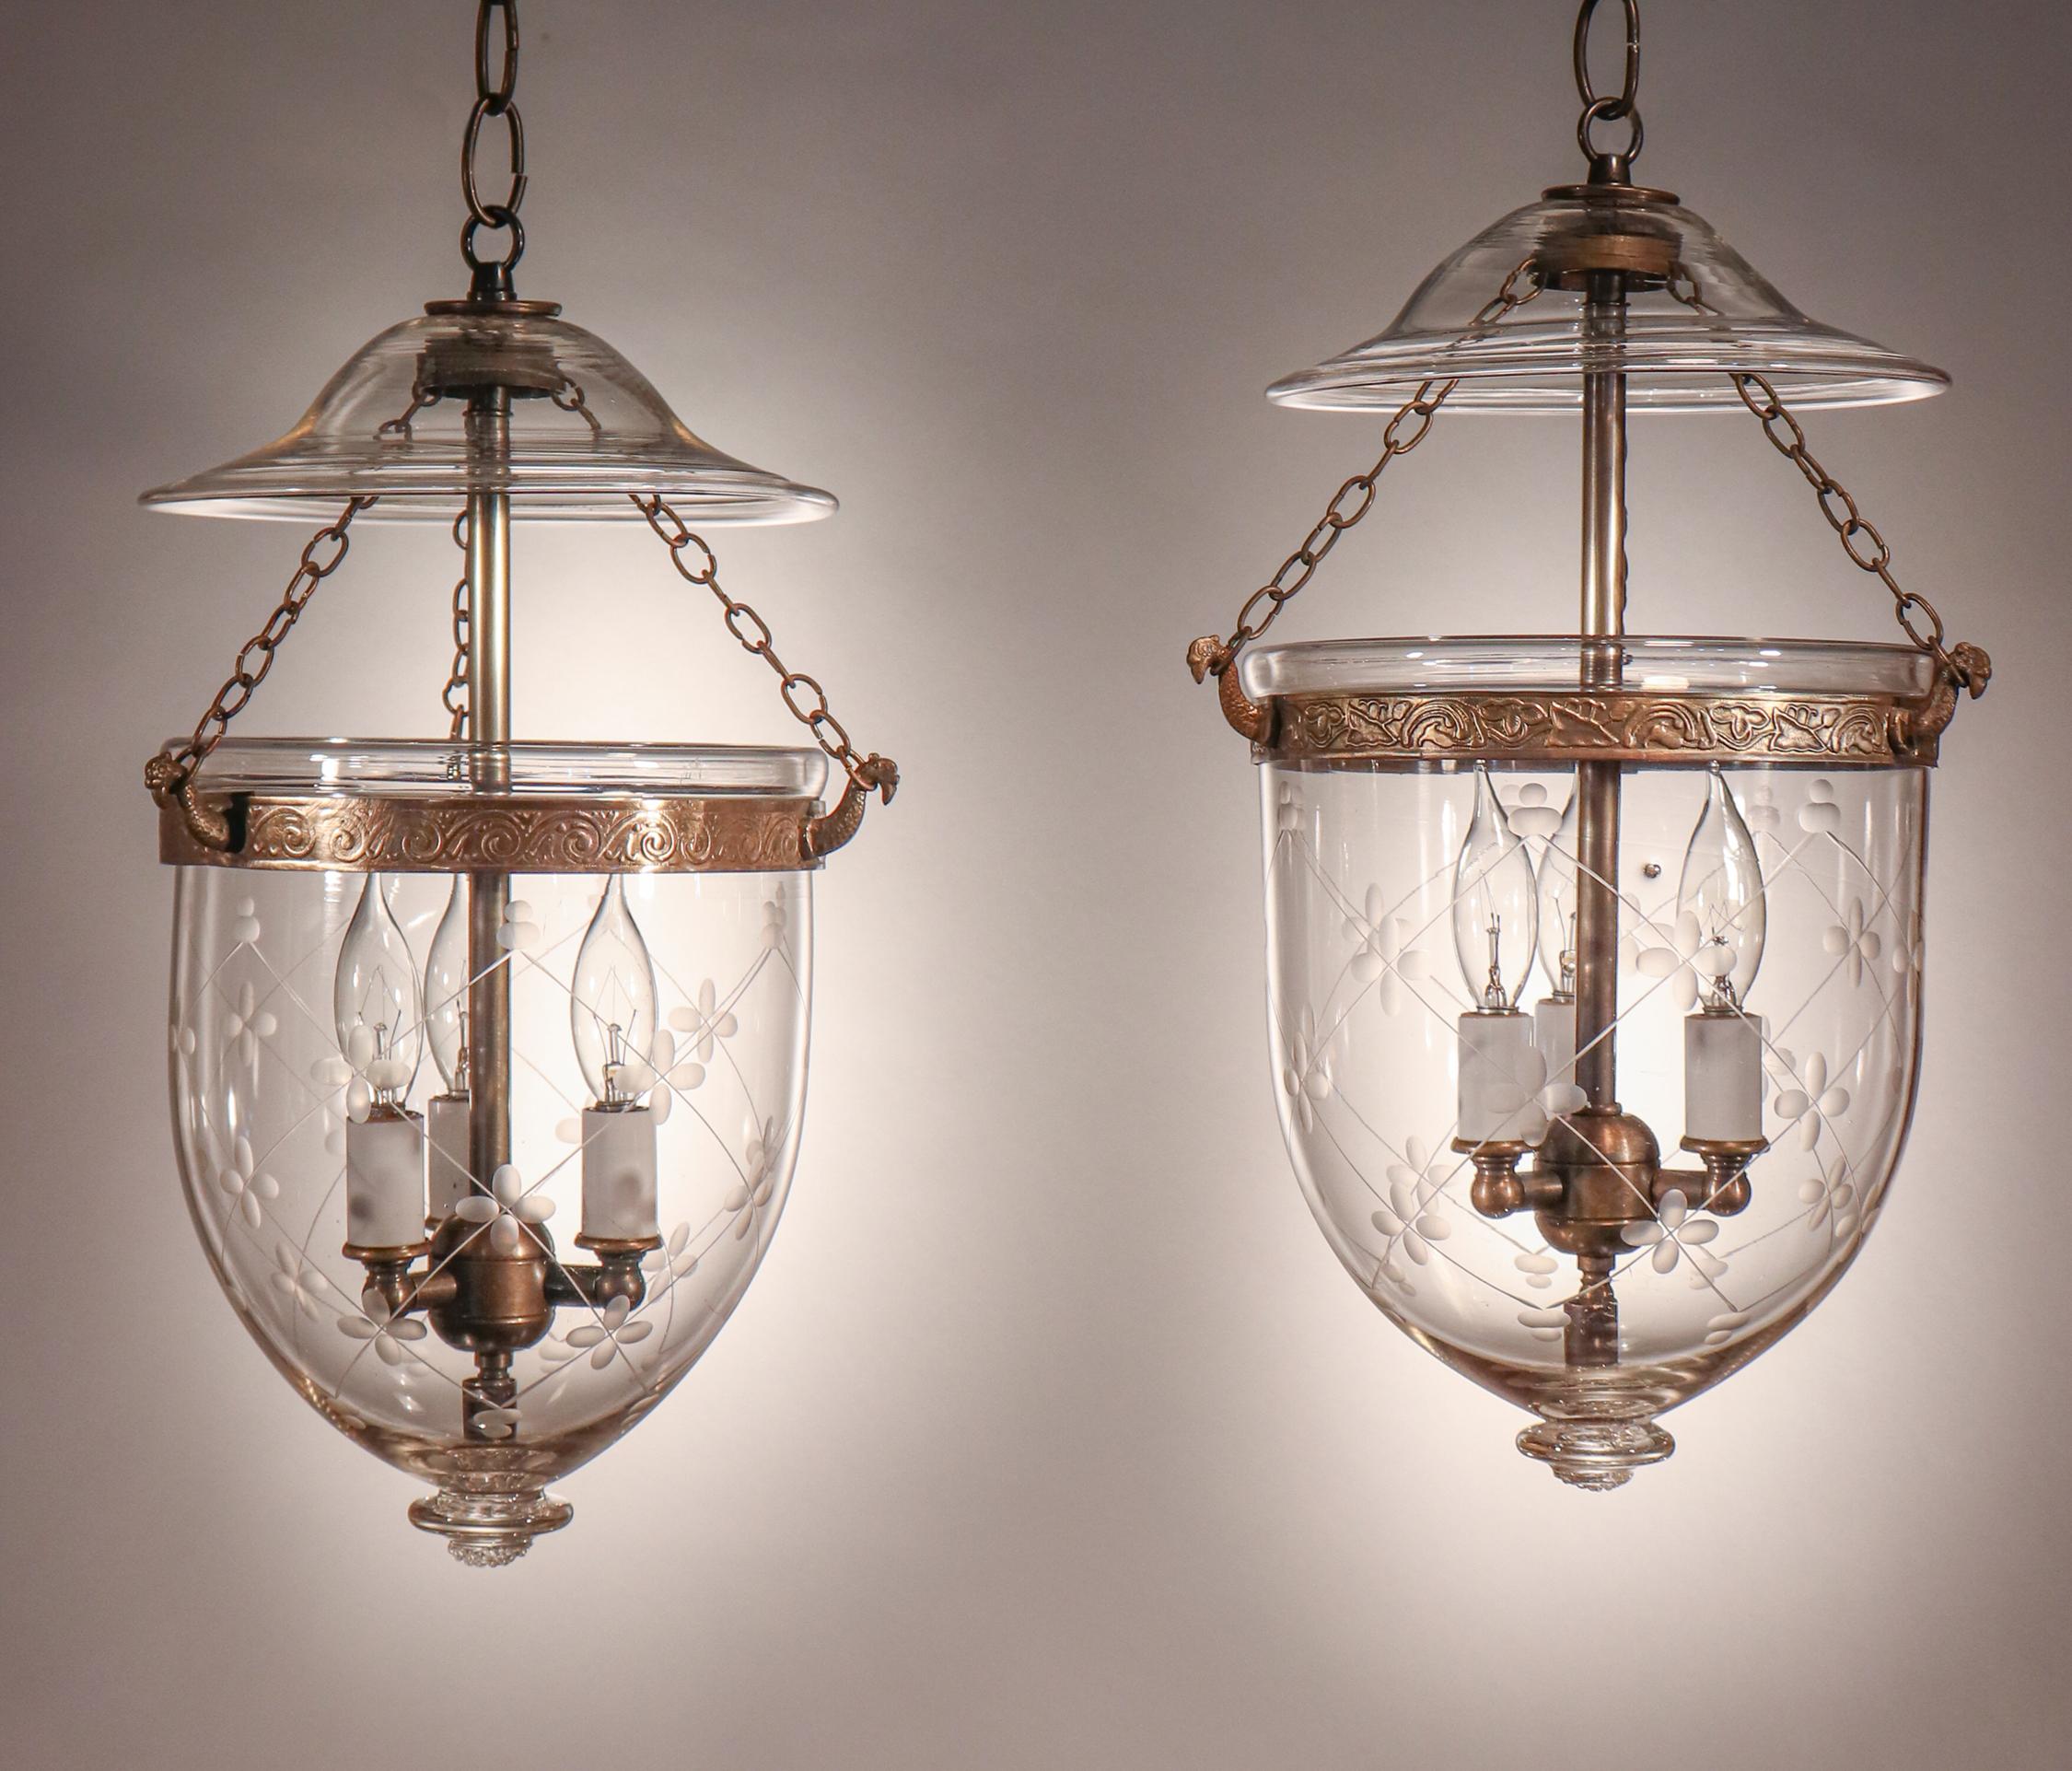 A rare, well-matched pair of petite English hand blown glass bell jar lanterns. Perfect for smaller spaces and/or lower ceiling heights, these circa 1890 pendants feature lovely form and a finely etched trellis motif. The brass bands, which have